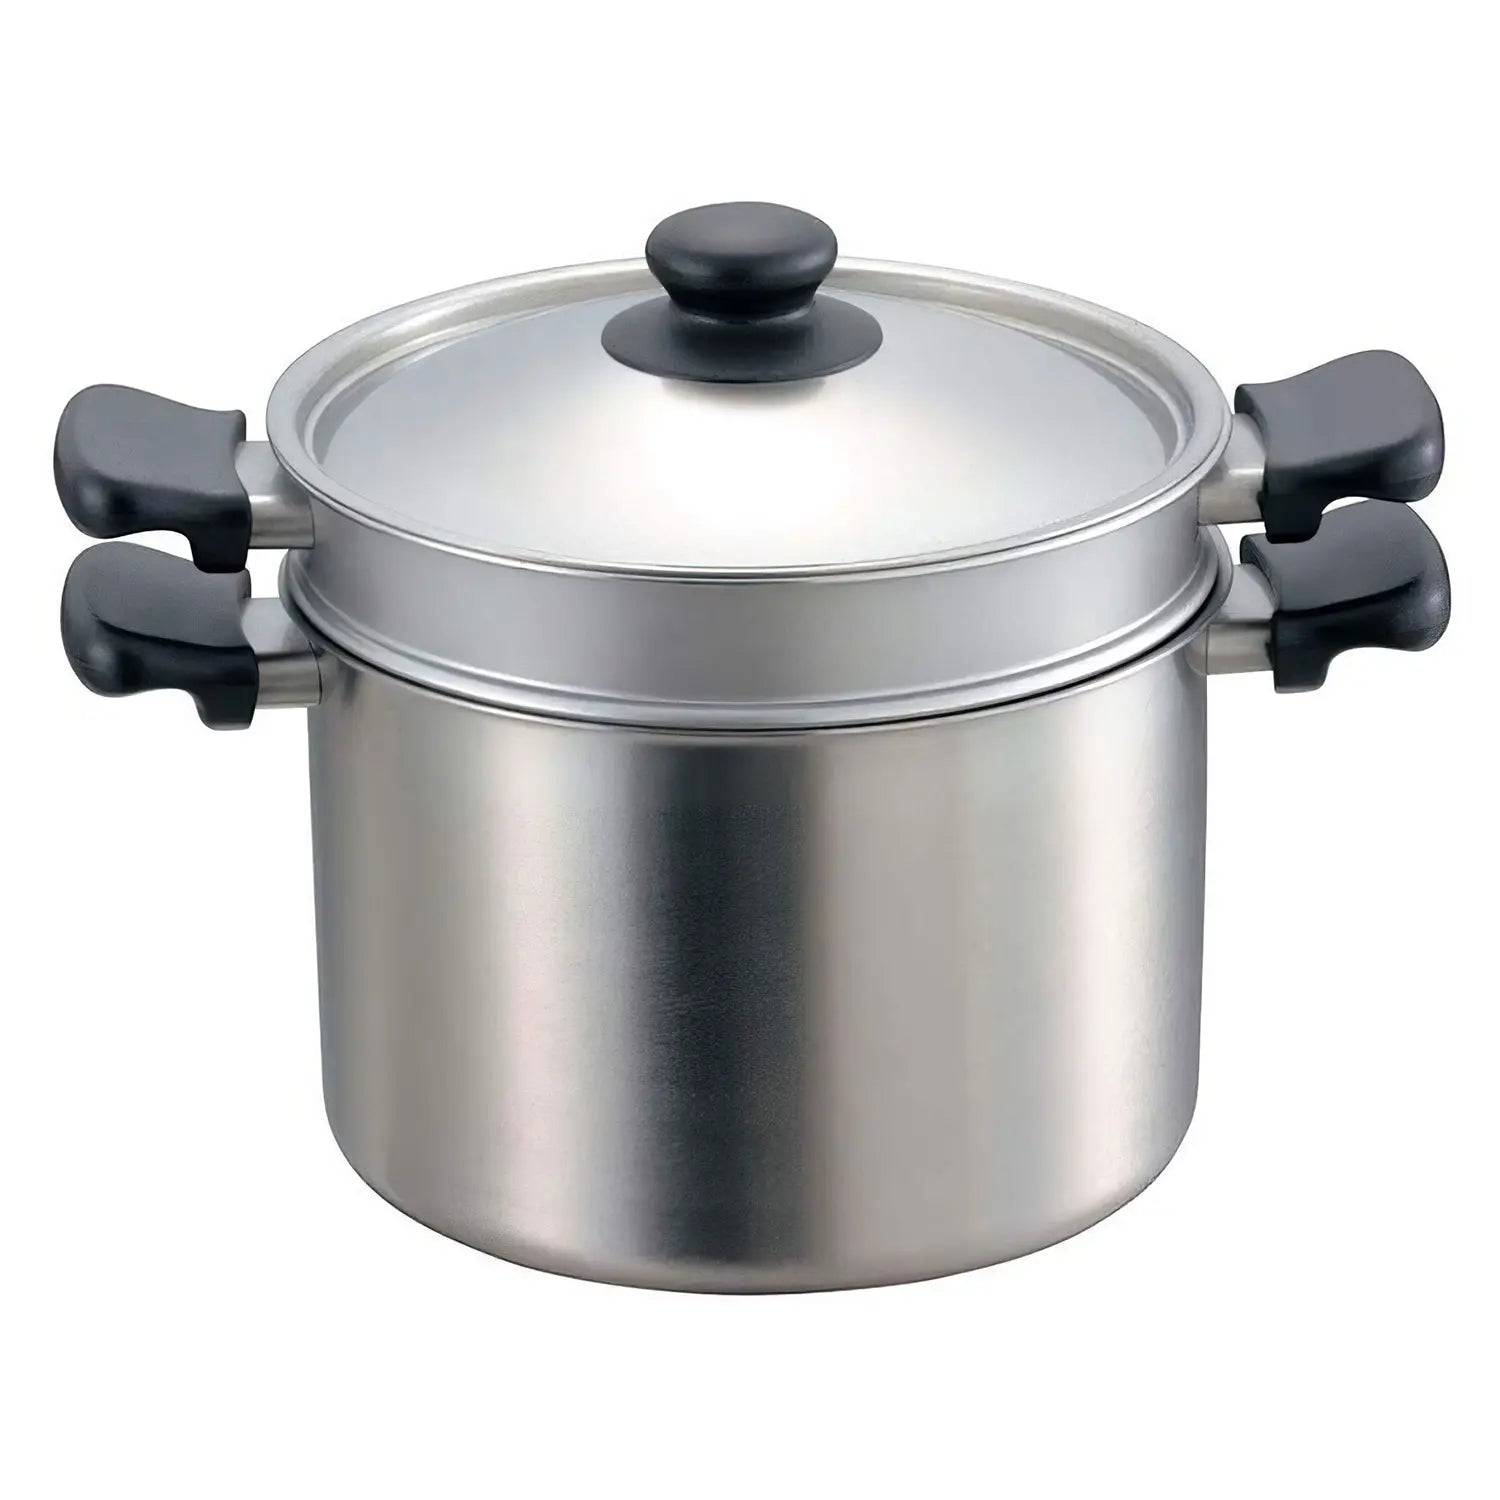 https://cdn.shopify.com/s/files/1/1610/3863/products/SoriYanagiStainlessSteelStockpot22cmwithPastaInsert_1_1600x.webp?v=1667955720